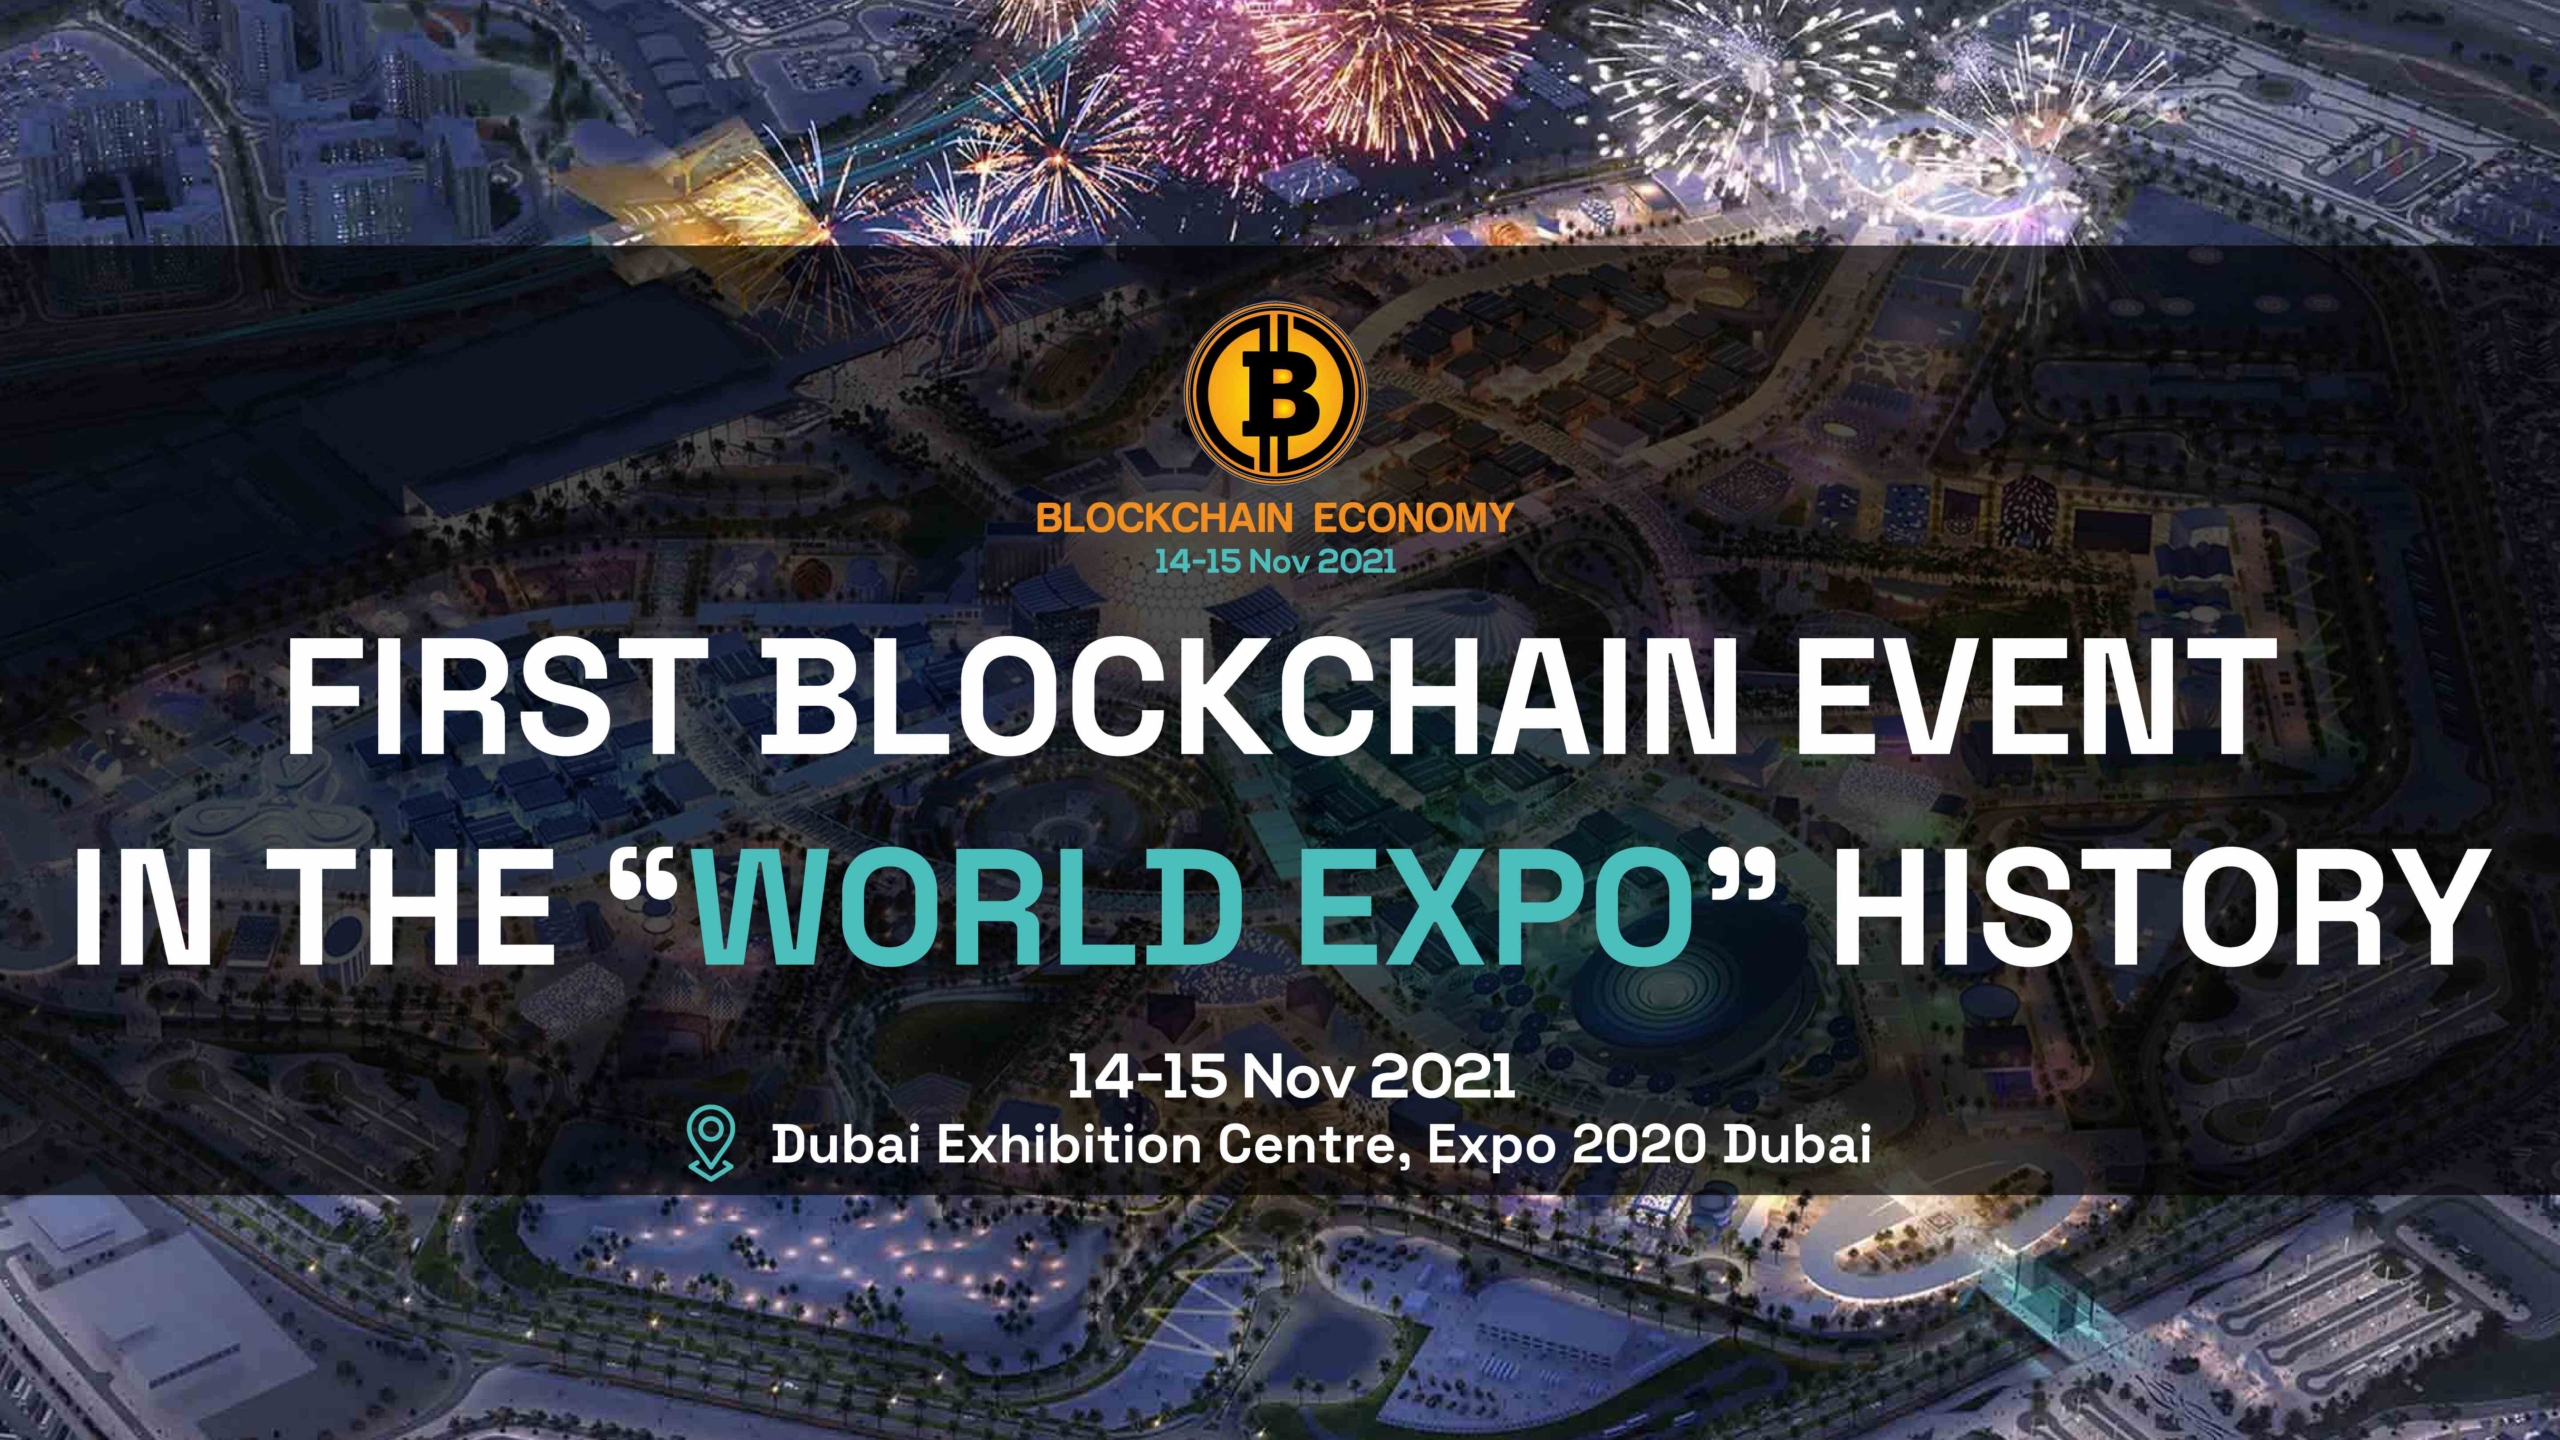 FIRST BLOCKCHAIN EVENT IN THE “WORLD EXPO” HISTORY